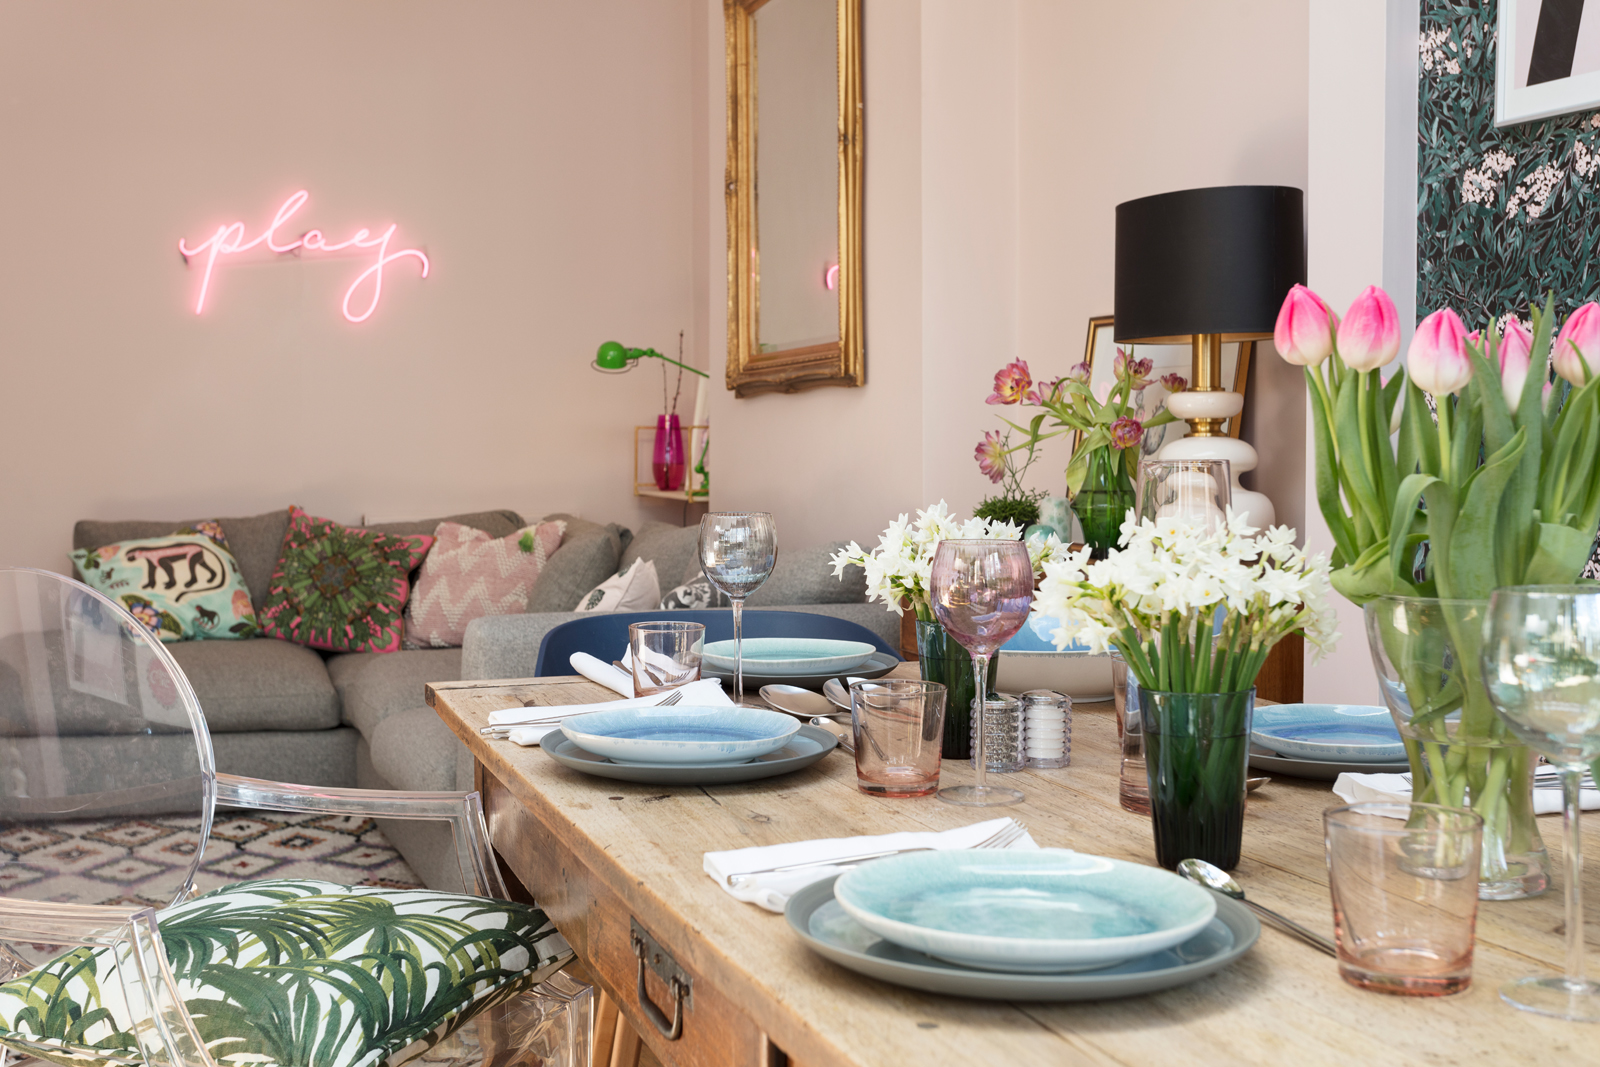 Spring has sprung in The Pink House dining room/Photo: Susie Lowe